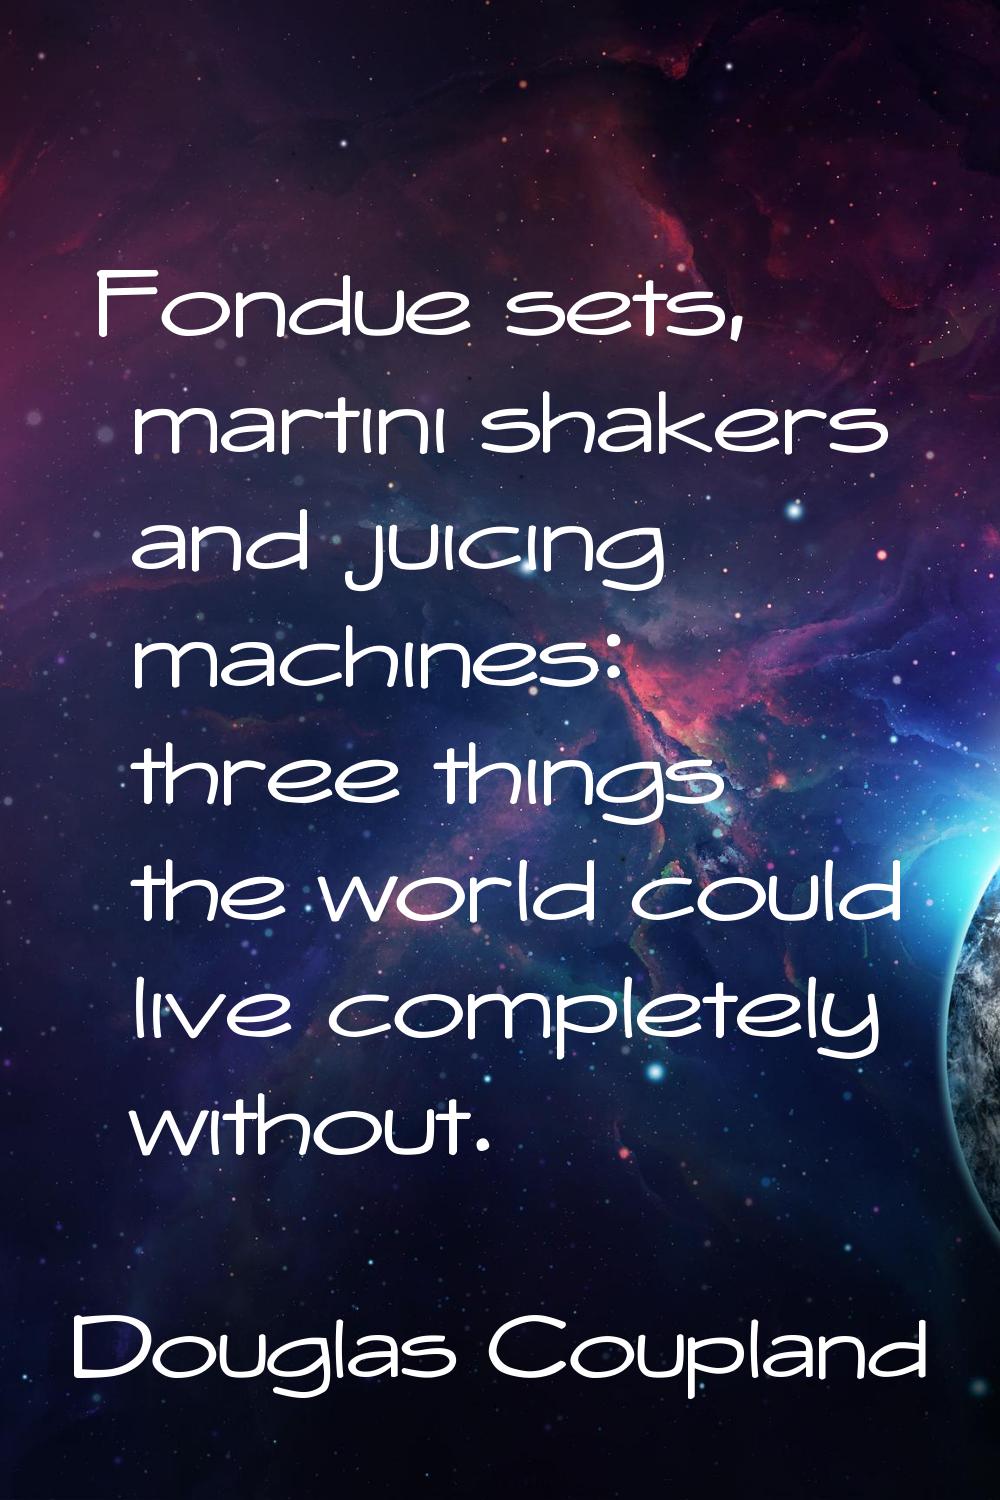 Fondue sets, martini shakers and juicing machines: three things the world could live completely wit